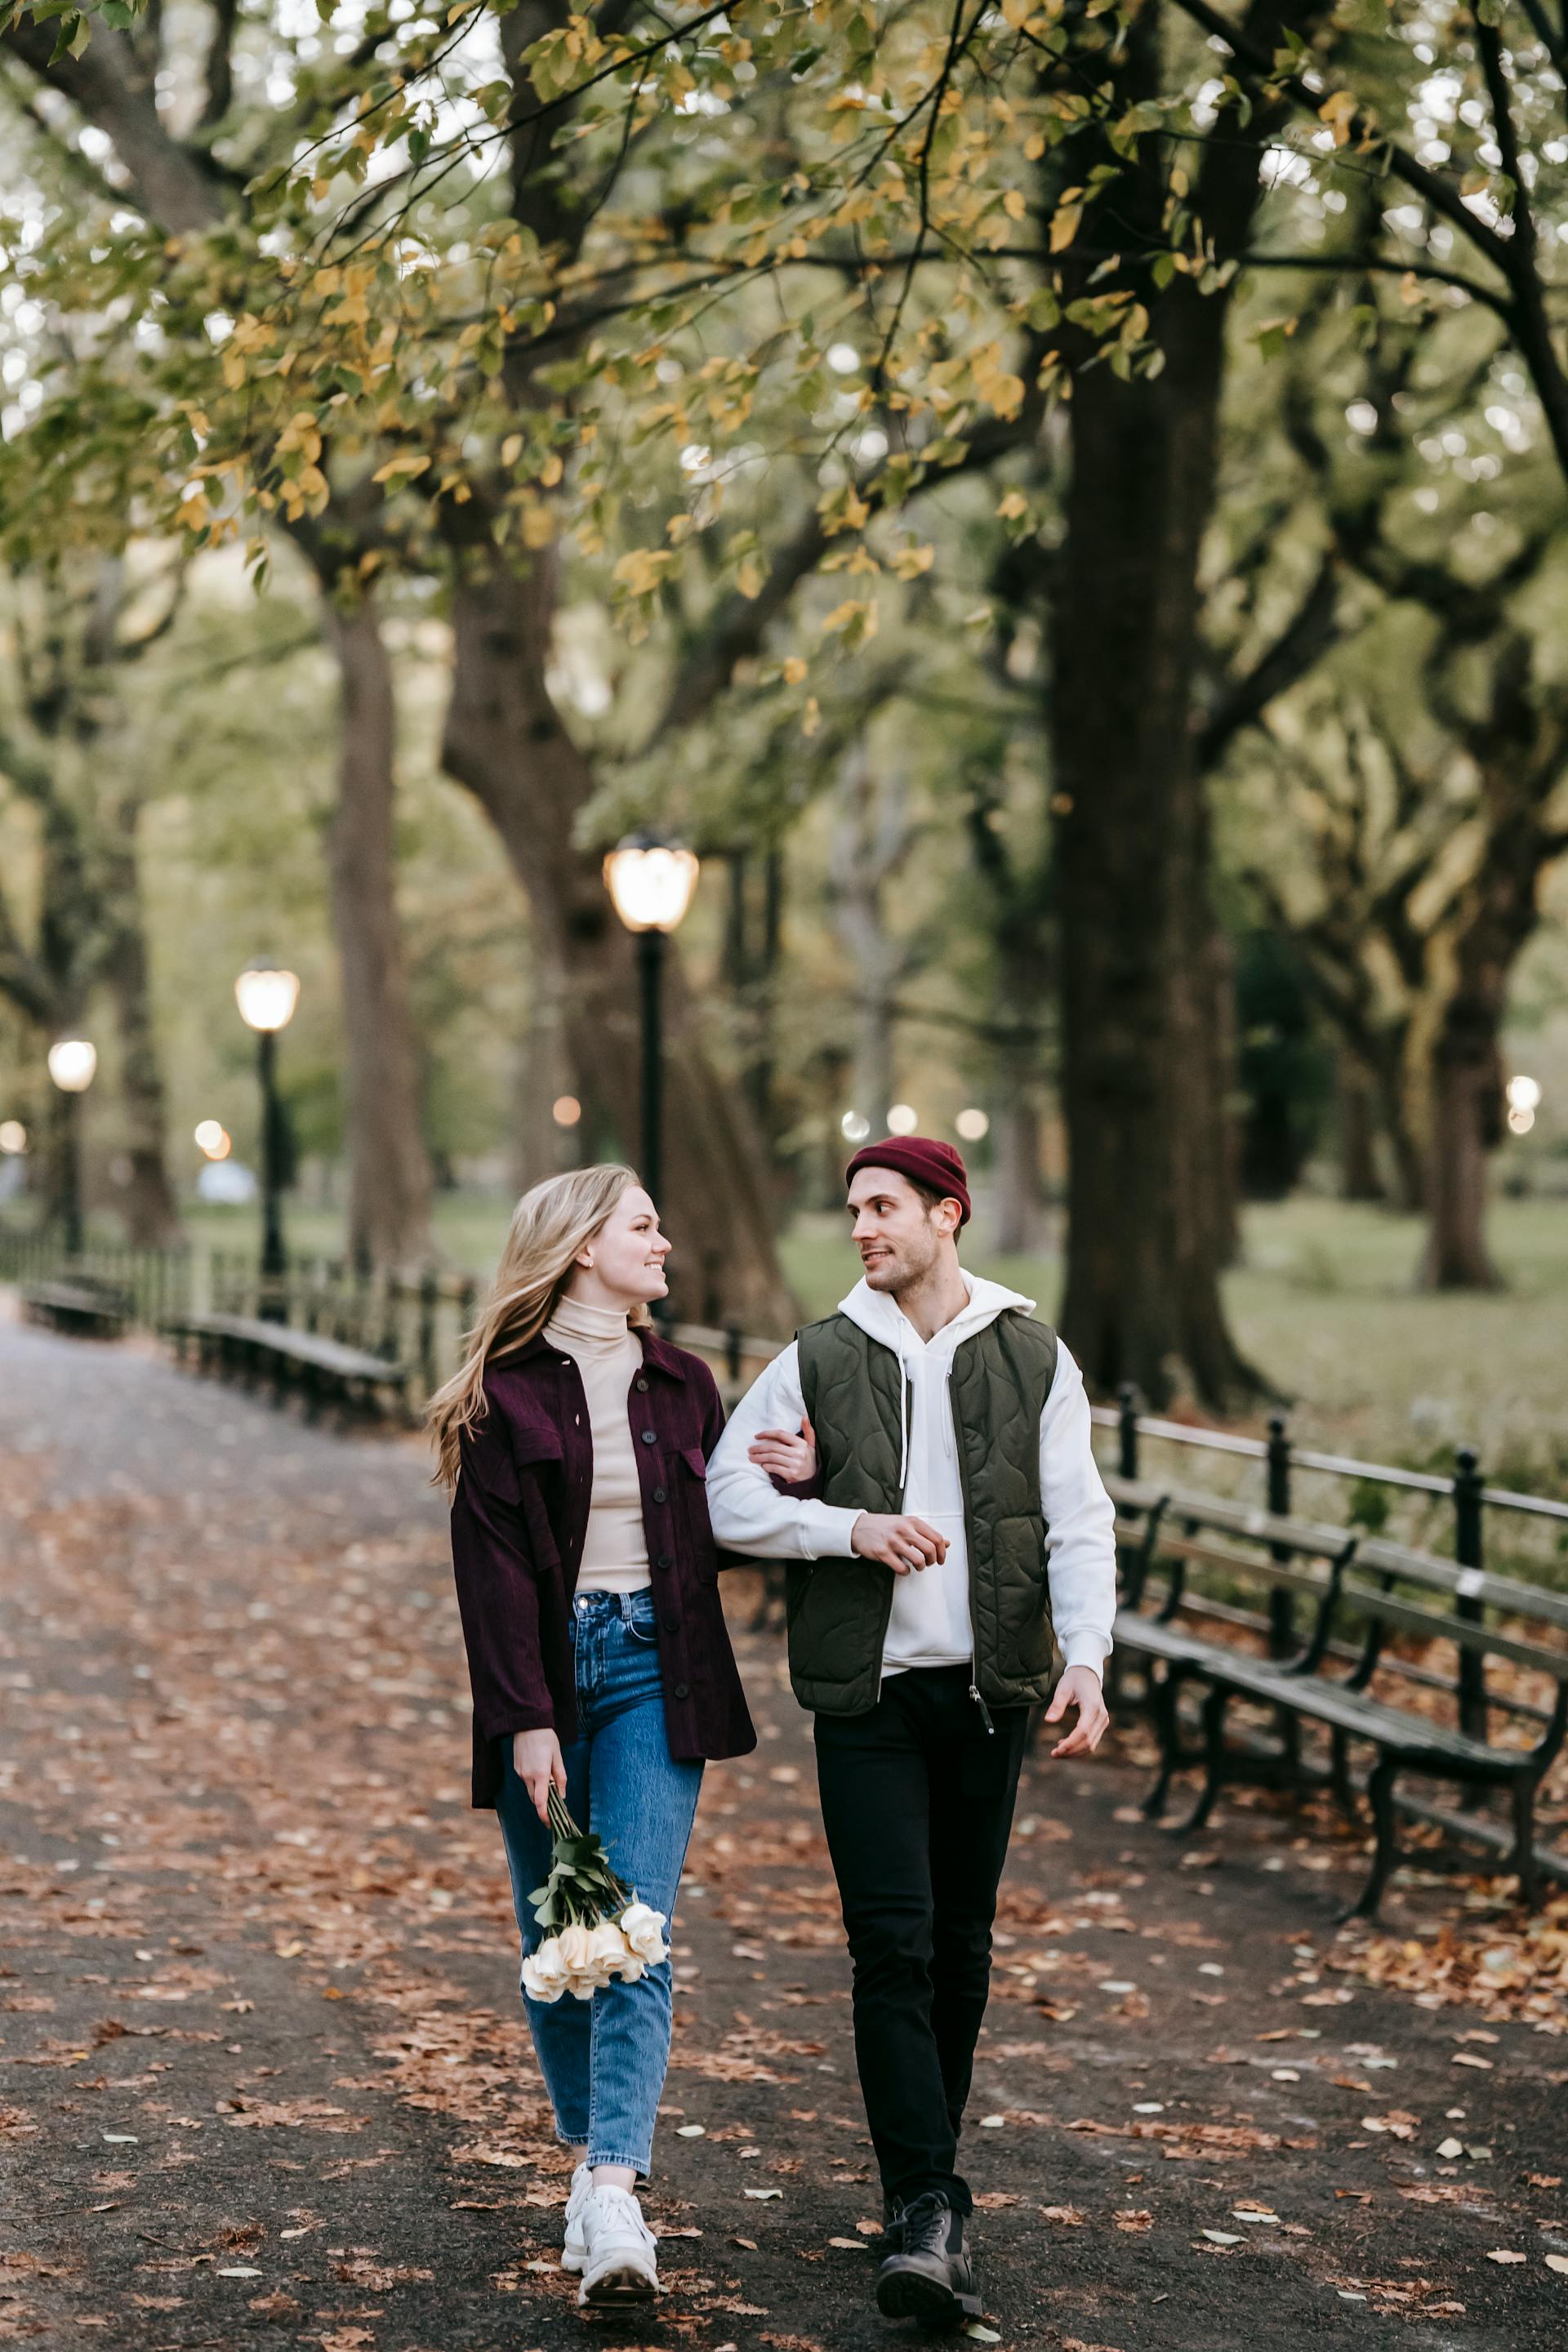 A couple taking a walk | Source: Pexels